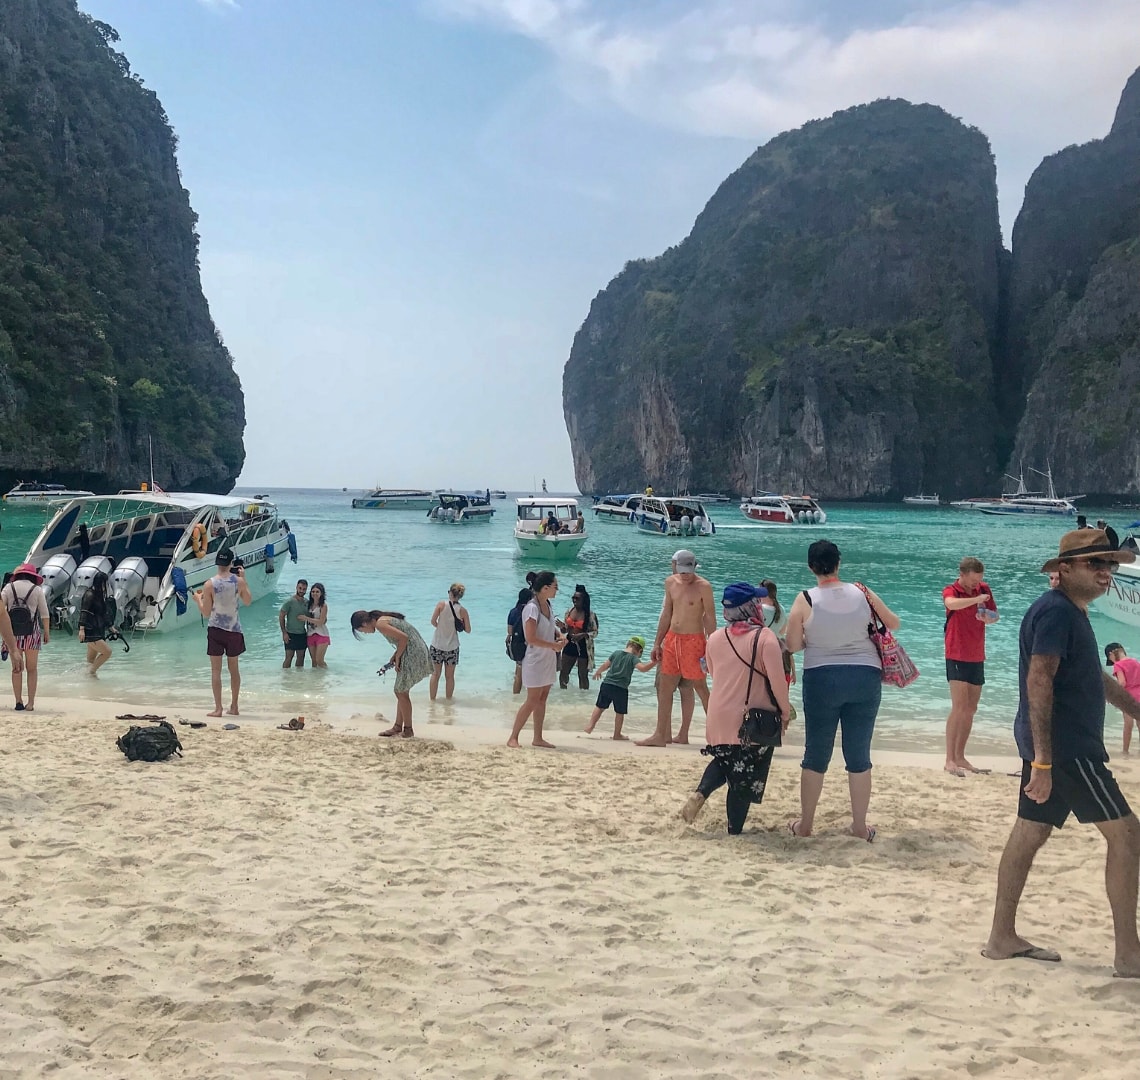 Volunteer tourism - a photo of the crowded beach on Koh Phi Phi with lots of boats coming and going